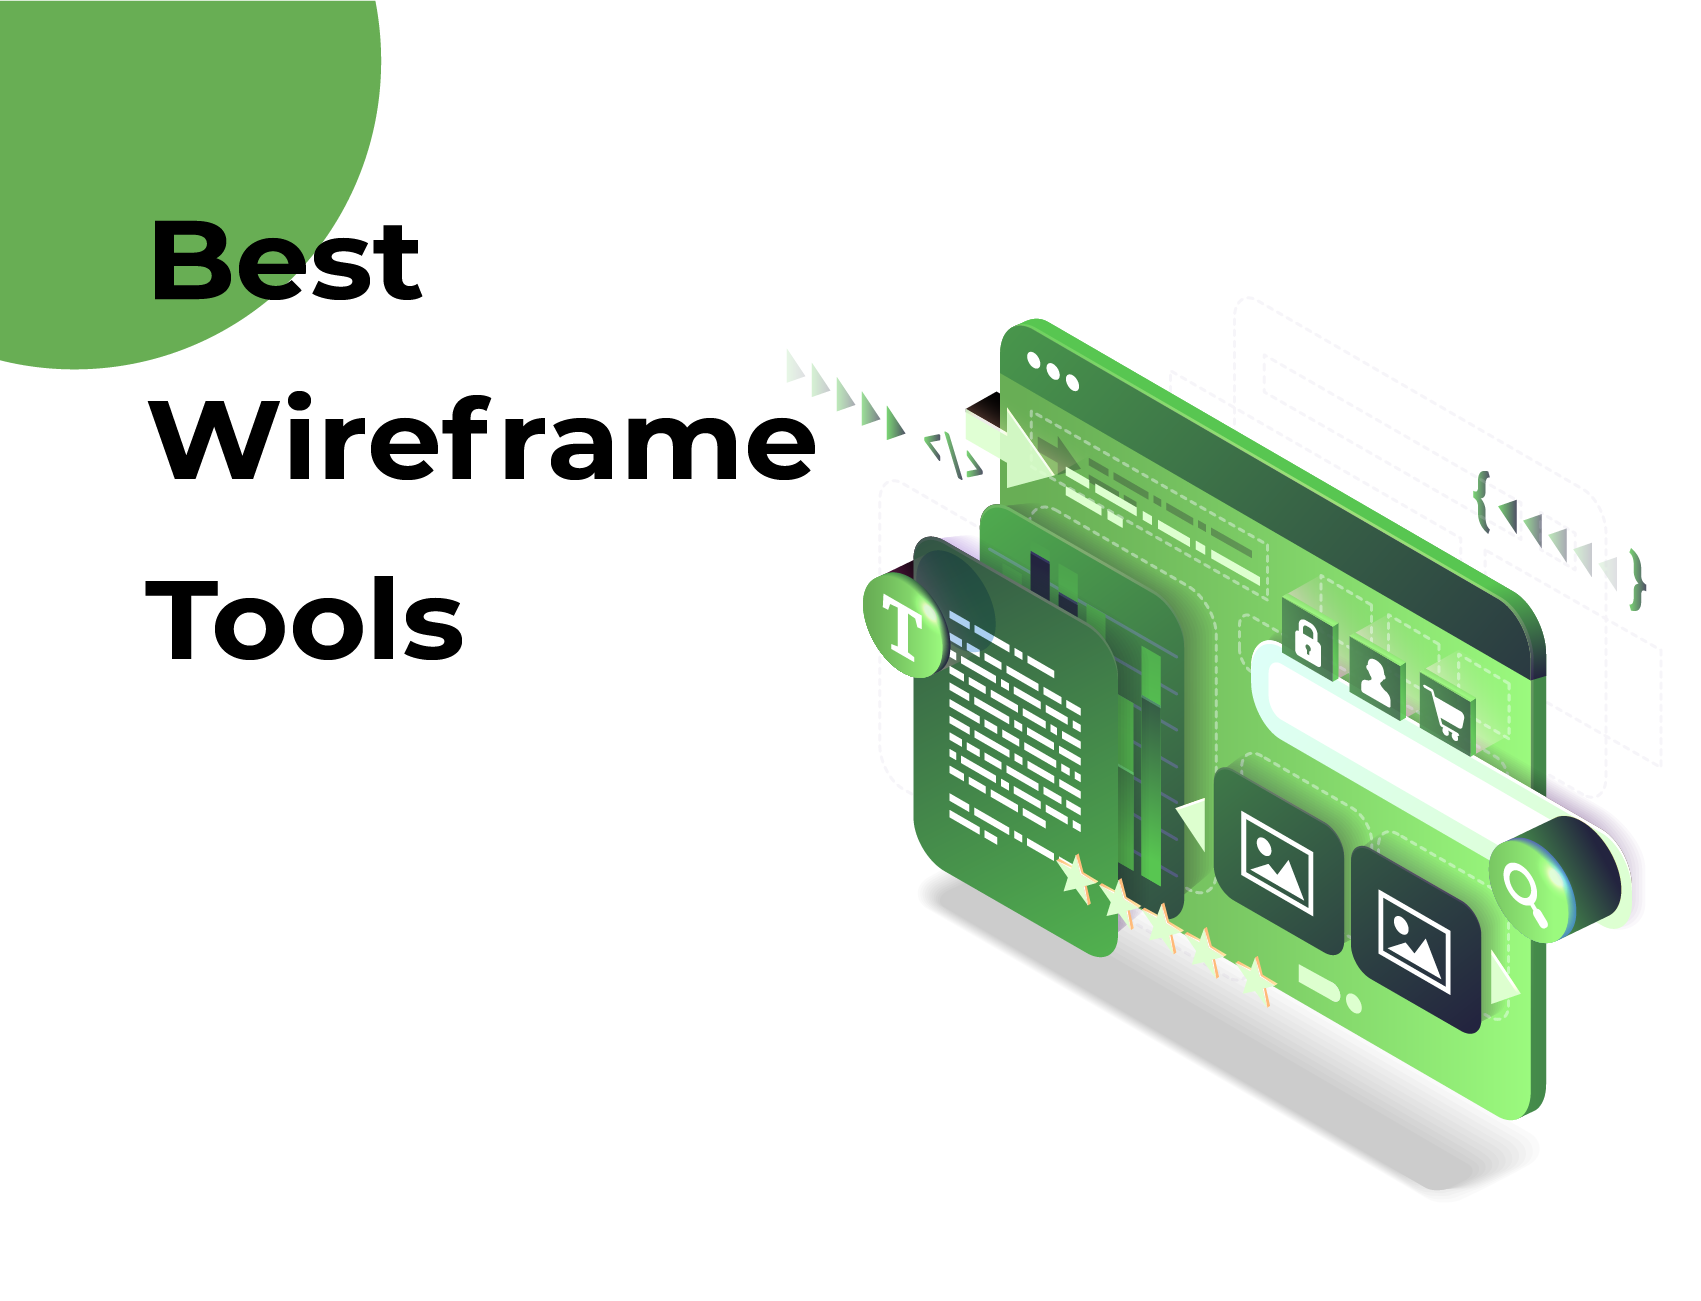 wireframe tools most popular